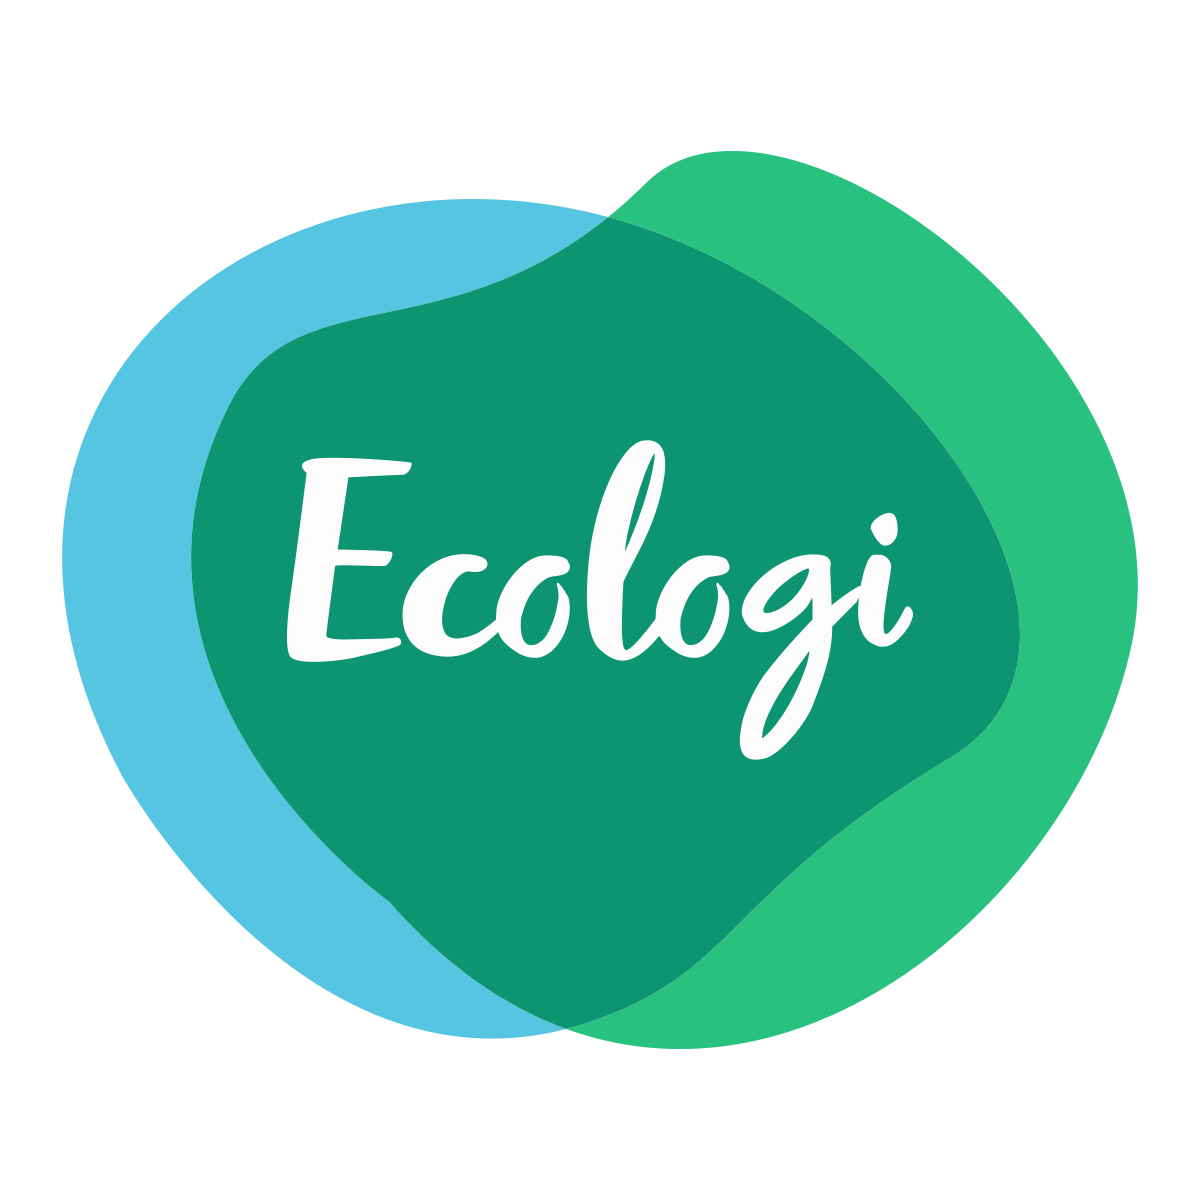 Our Partnership with Ecologi